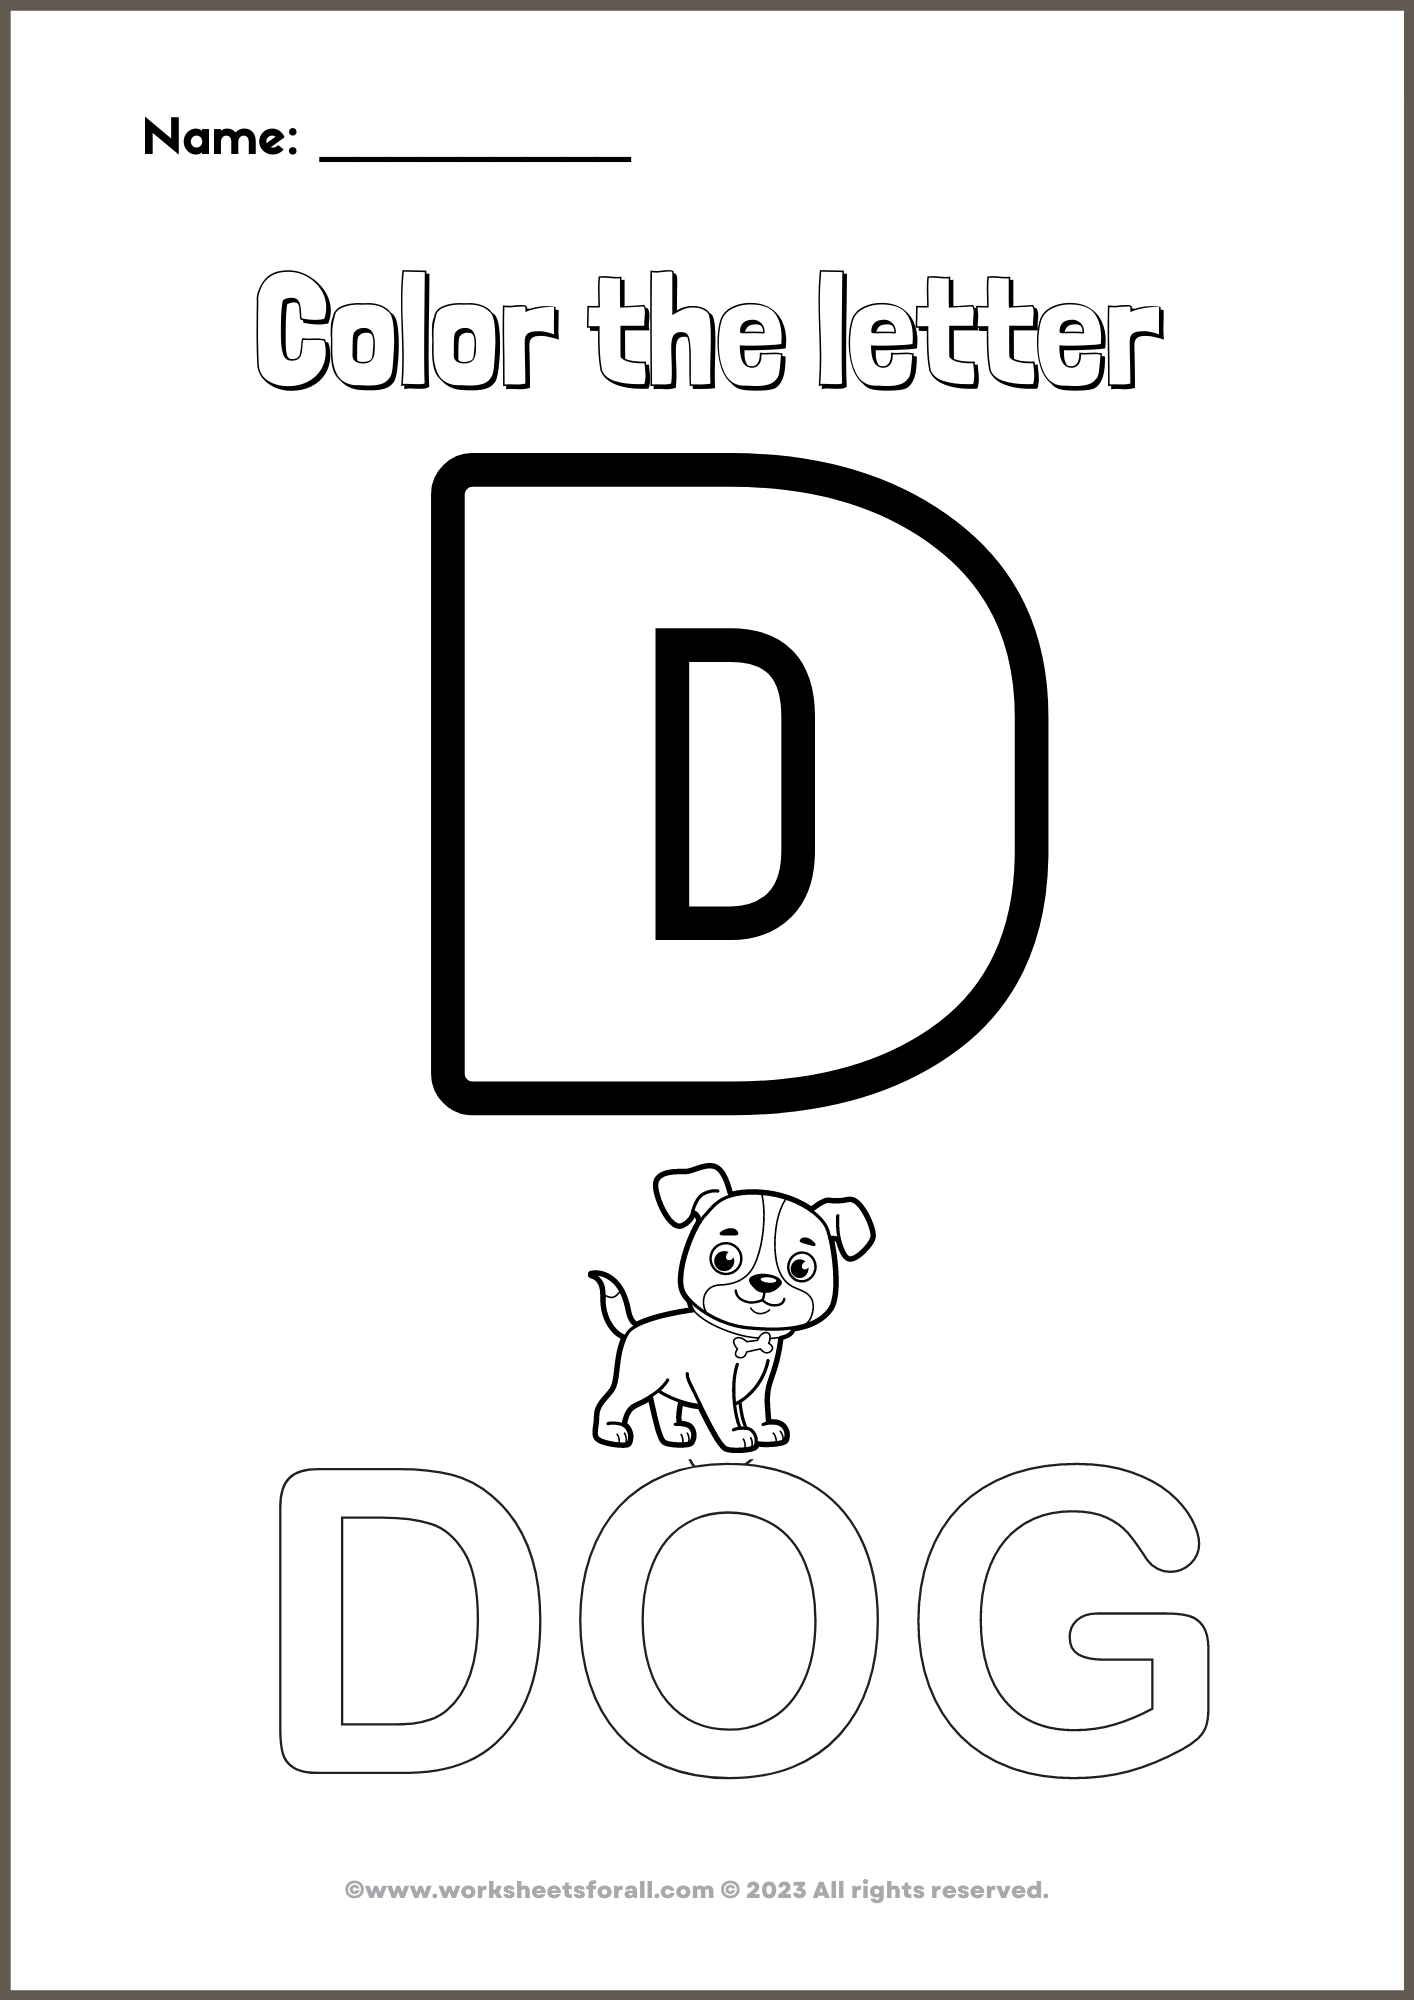 Free Alphabet Coloring Page - Coloring Sheets For All Ages